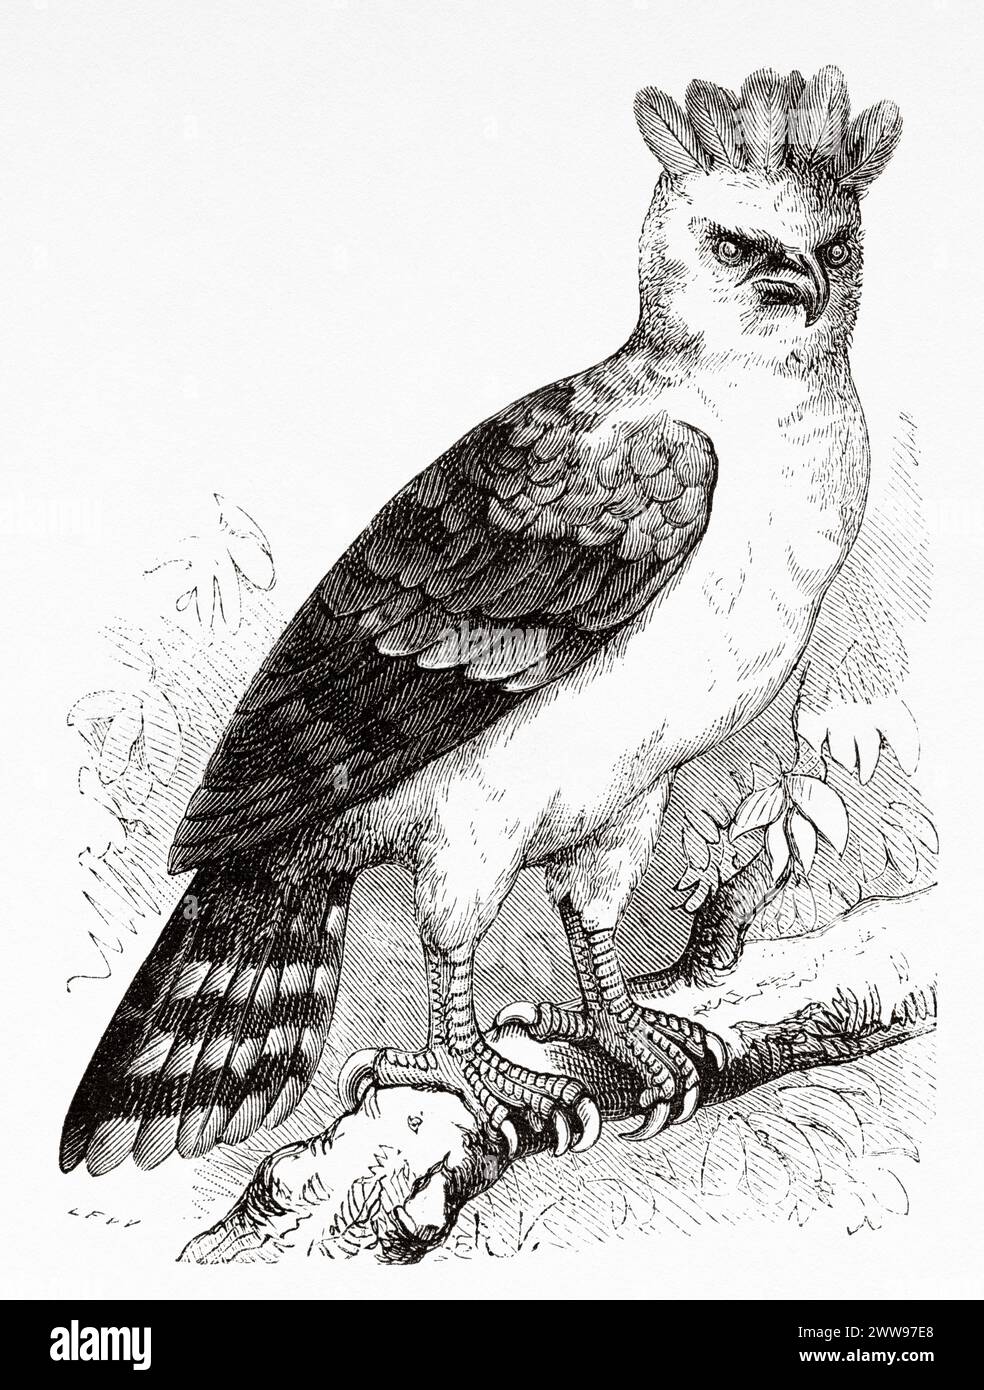 The harpy eagle. American harpy eagle is a neotropical species of eagle, French Guiana, South America. Drawing by R. Valette. From Cayenne to the Andes (1878-1879) by Jules Crevaux (1847 - 1882) Le Tour du Monde 1880 Stock Photo